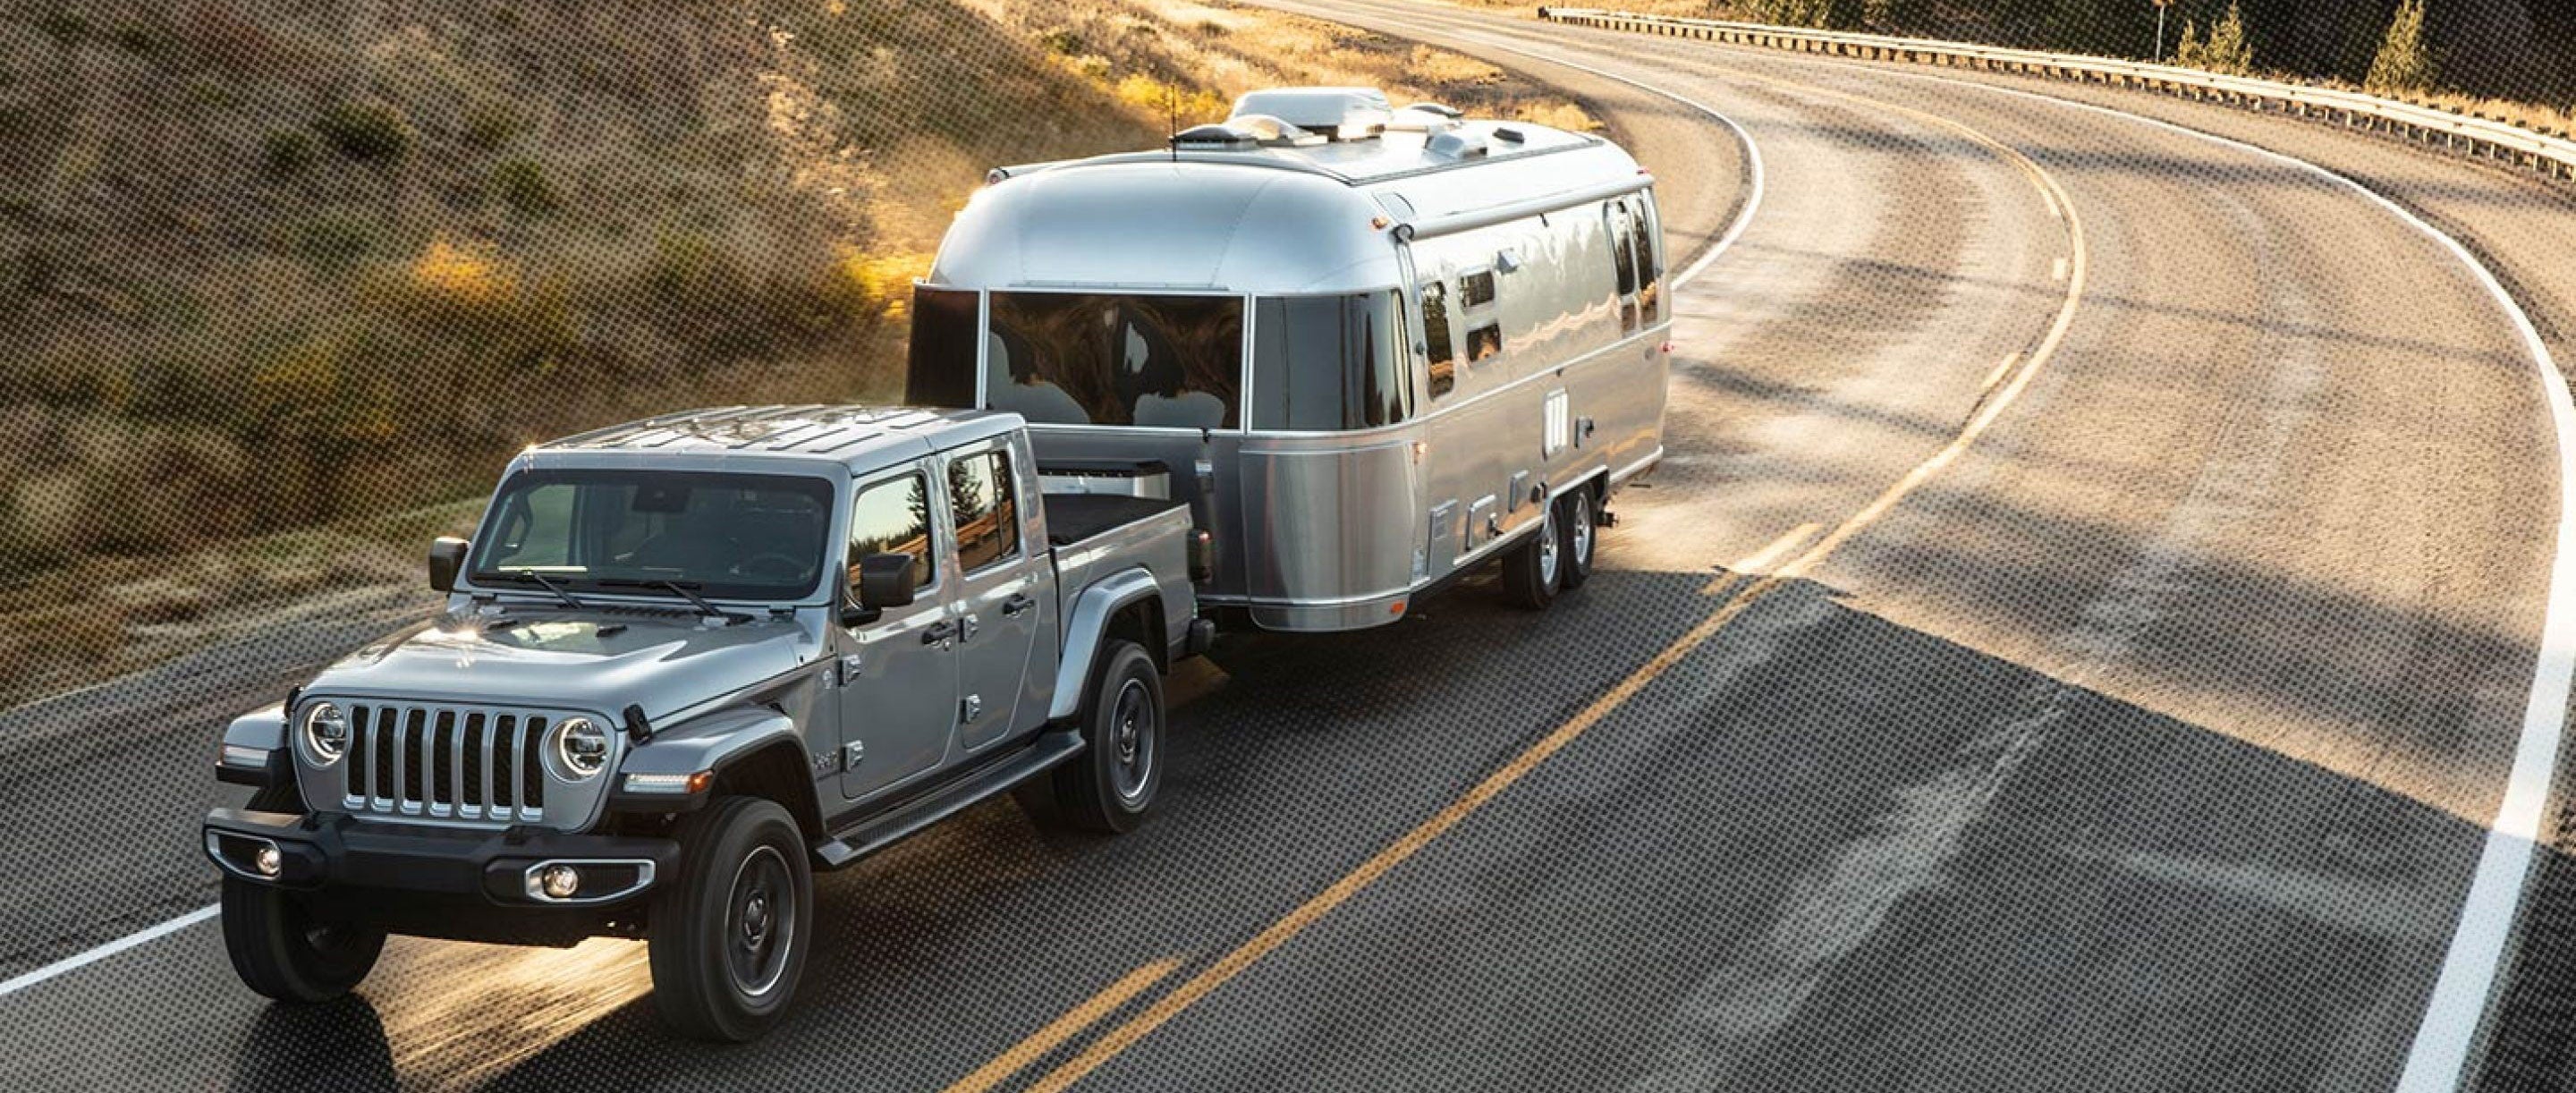 2020 Jeep Gladiator Towing Trailer